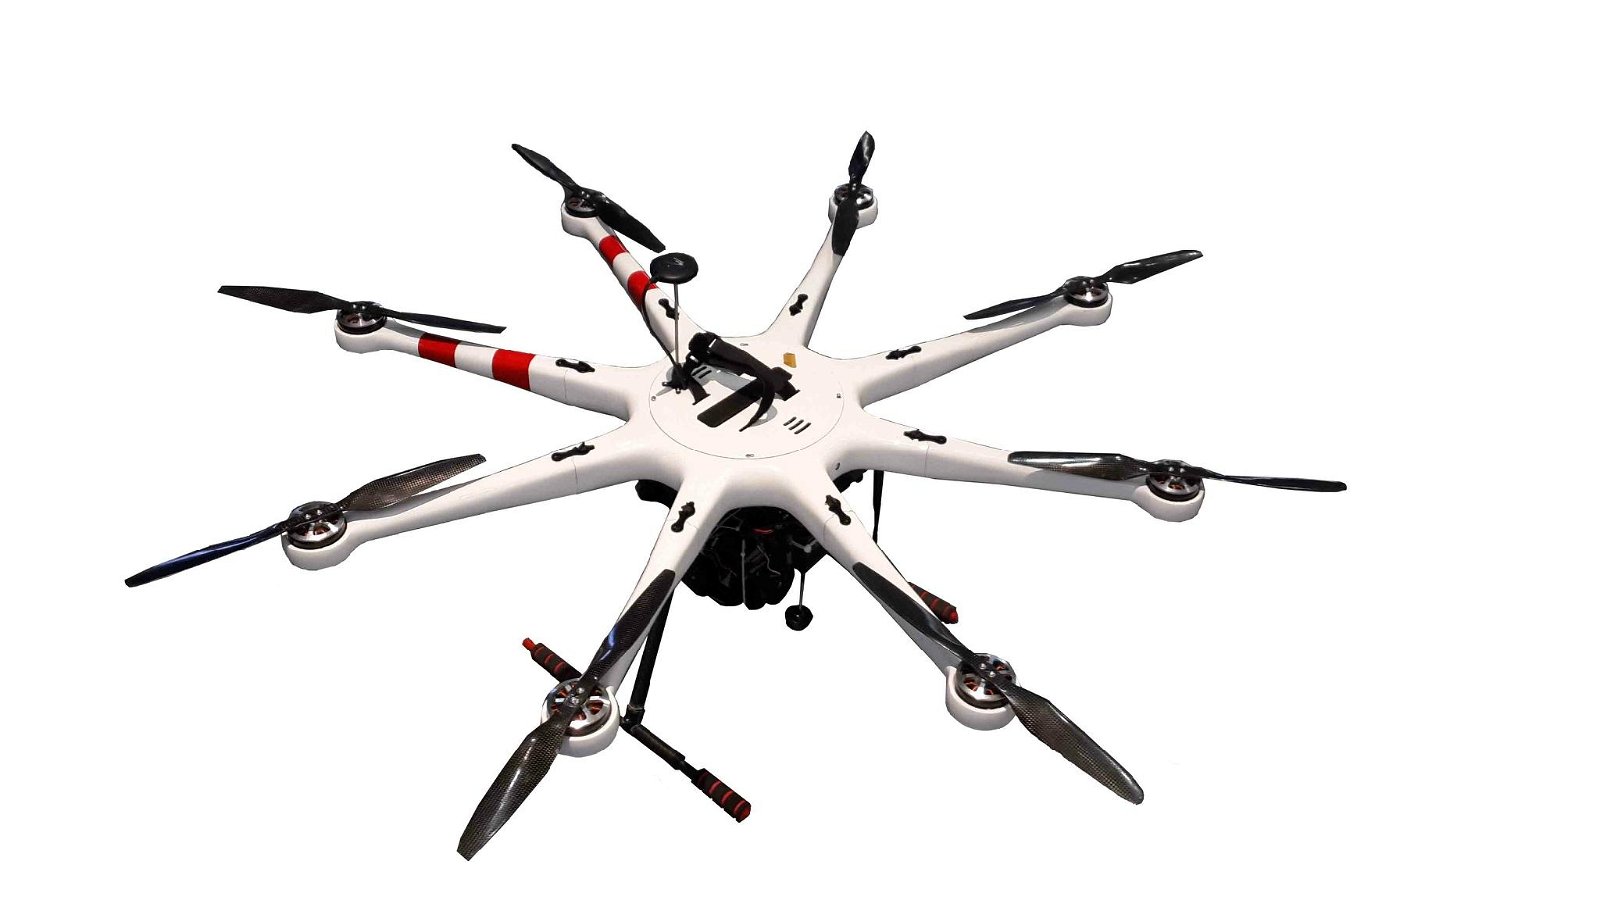 AIBIRD UAV KCx8 octocopter for Mapping & Surveillance